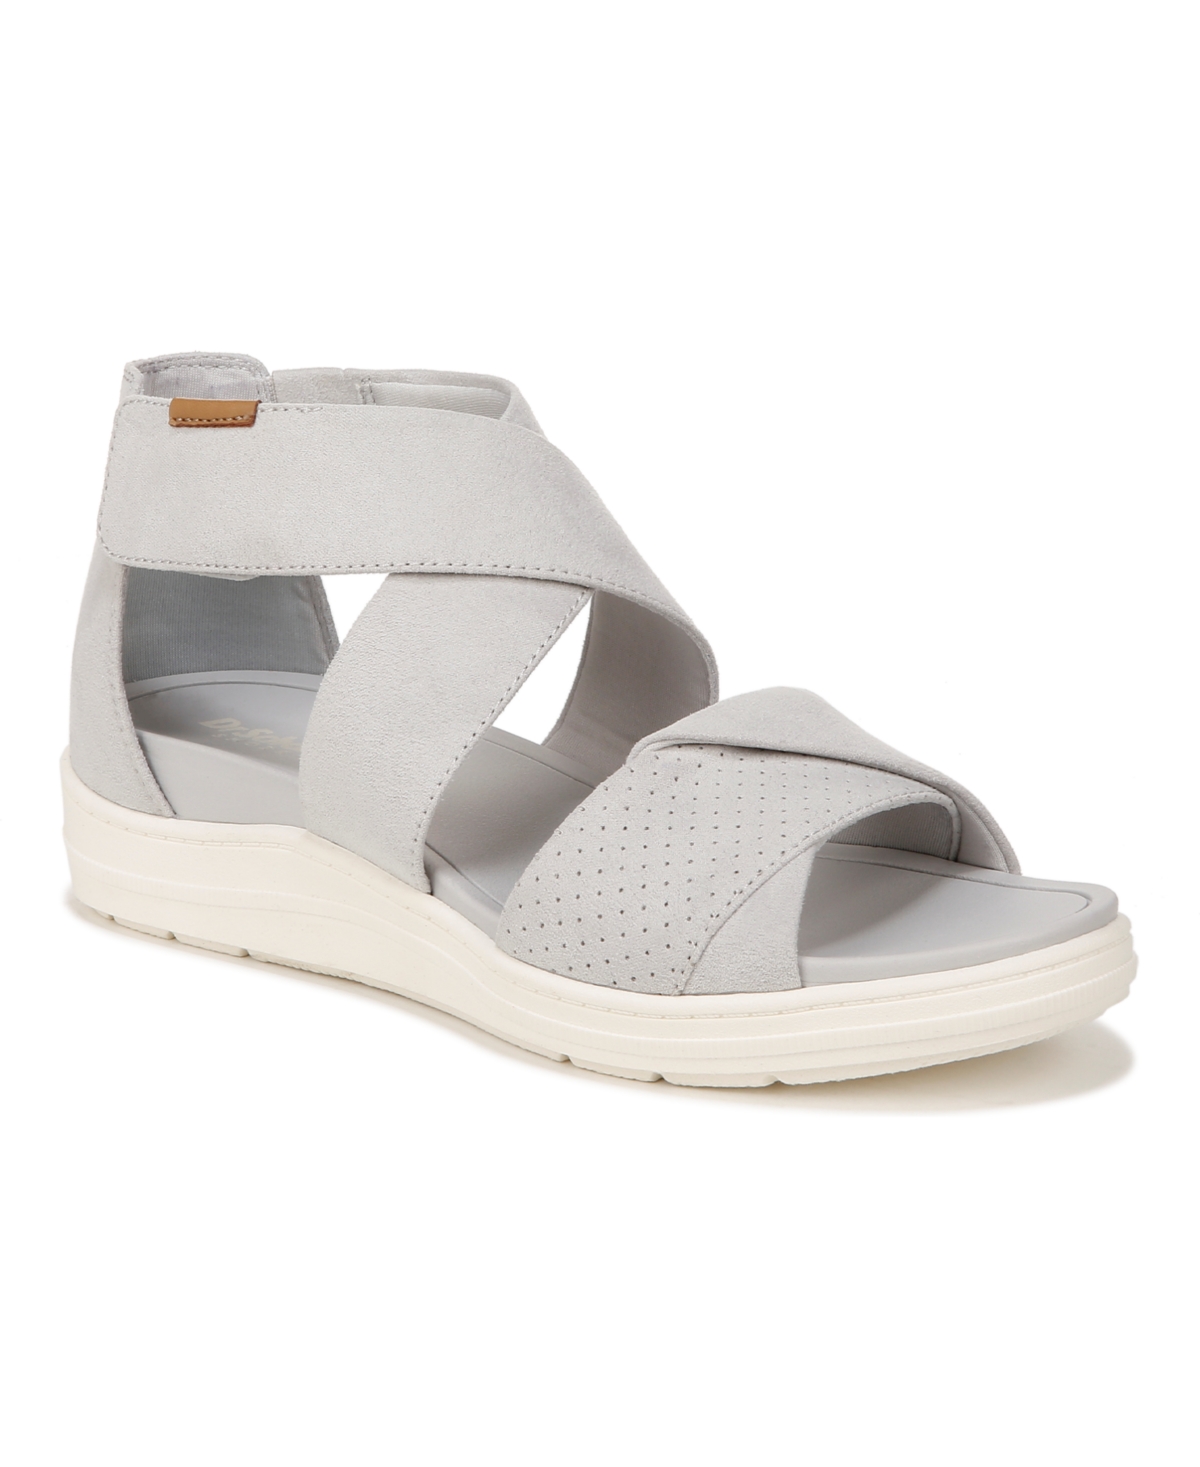 Women's Time Off Fun Ankle Strap Sandals - Off White Faux Leather